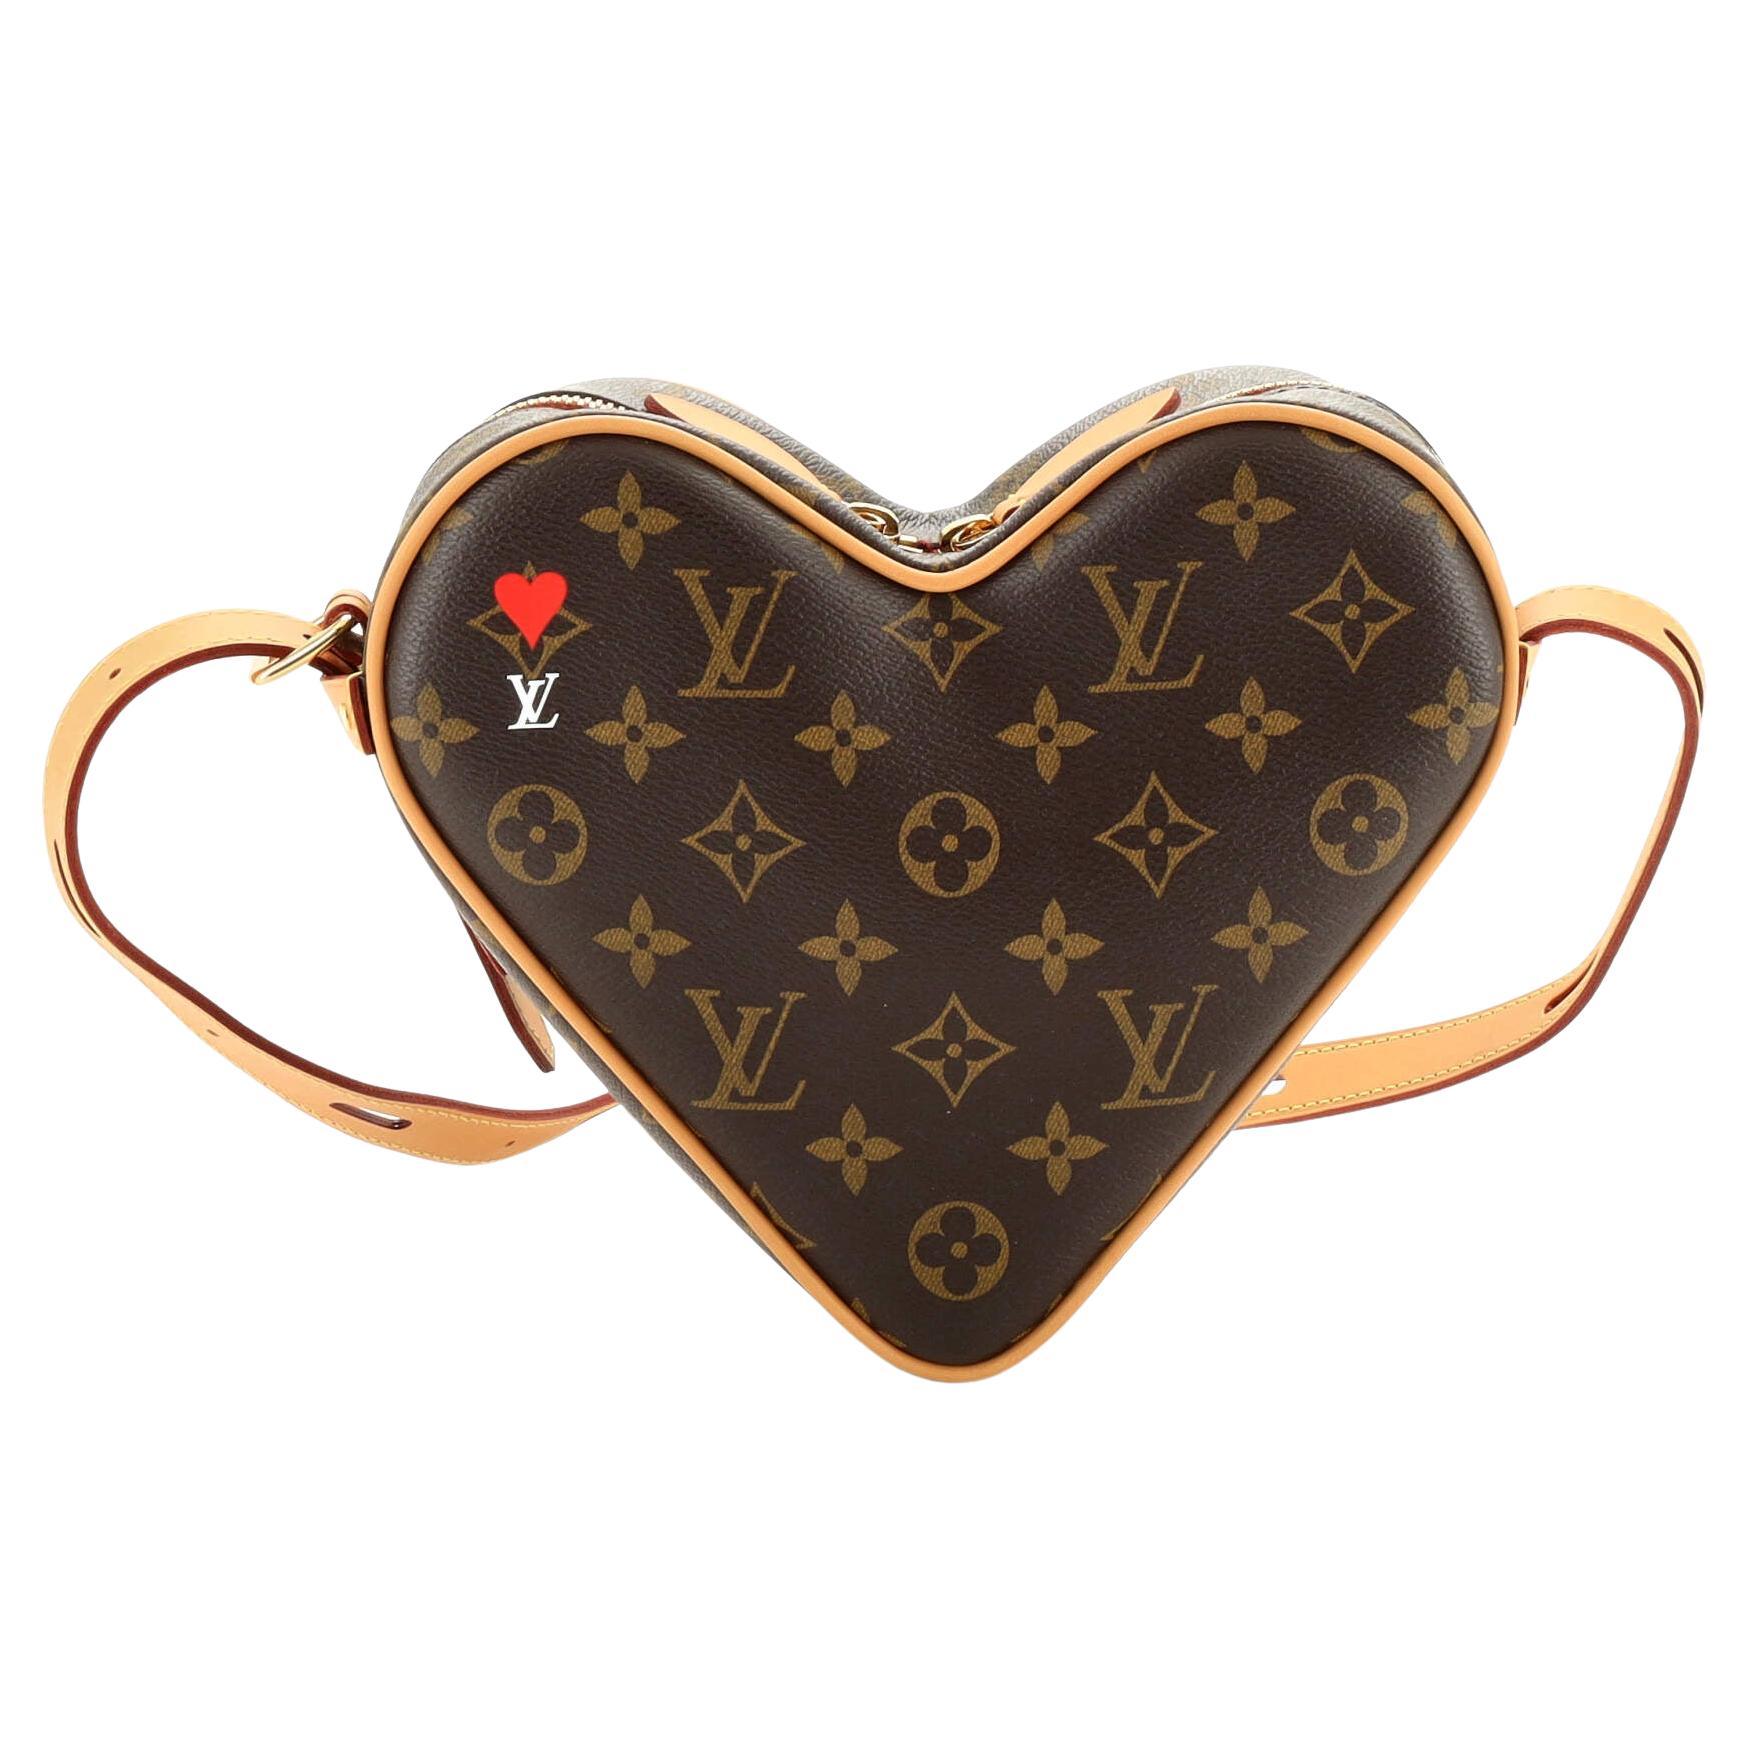 Black And Gold Louis Vuitton Bag - 198 For Sale on 1stDibs